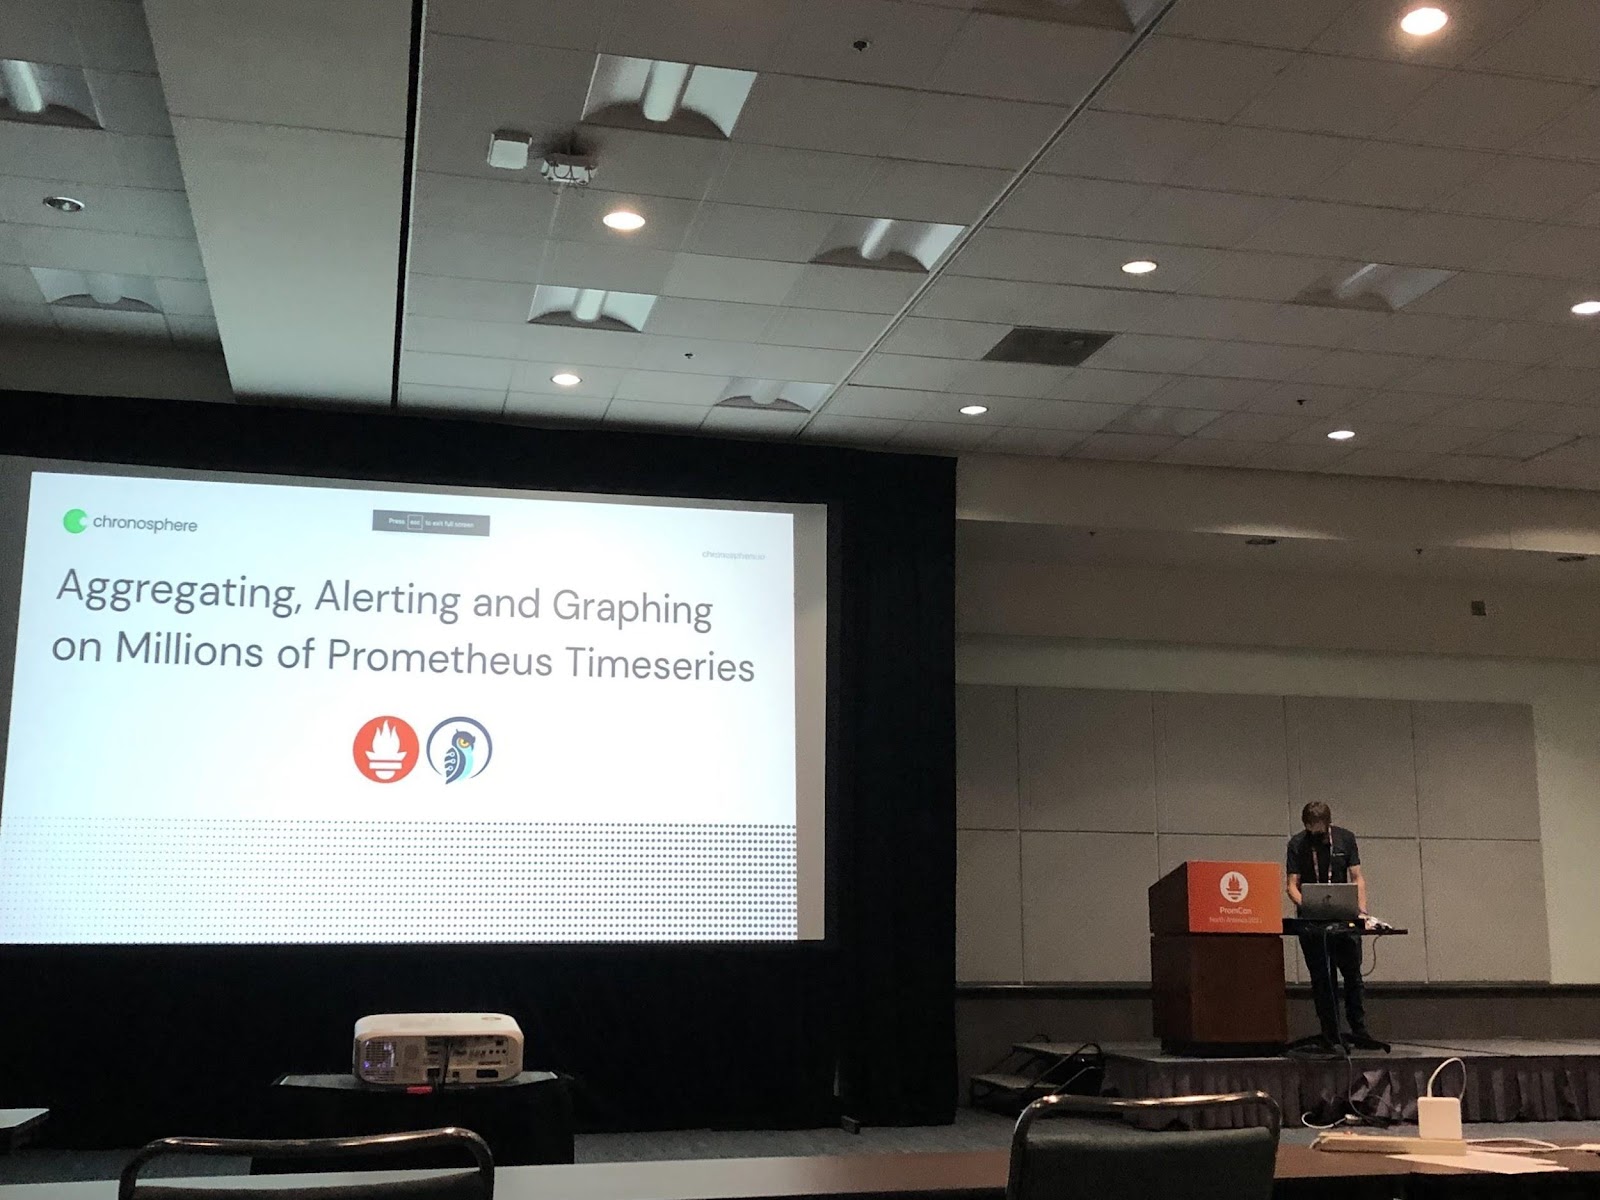 A talk regarding Aggregating, Alerting and Graphing on Millions of Prometheus Timeseries presented by Rob Skillington